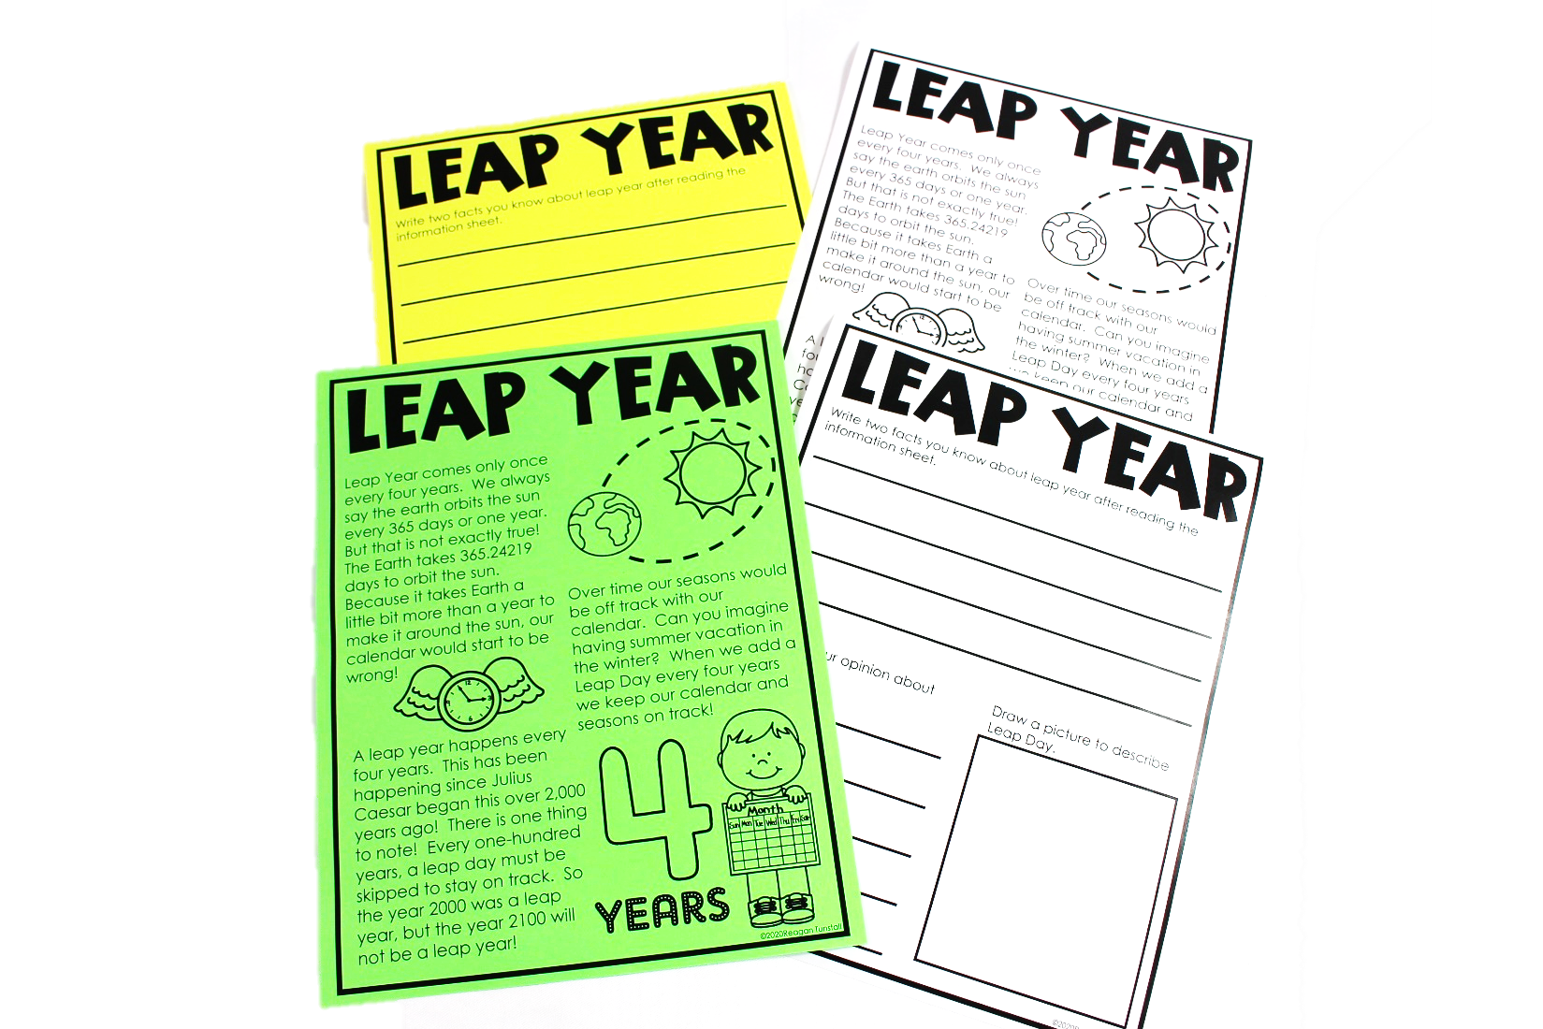 an information sheet which can be used in any way that fits your learners! This can be used for a close read activity or to simply read and share the information with your class about why leap day has come to be. 